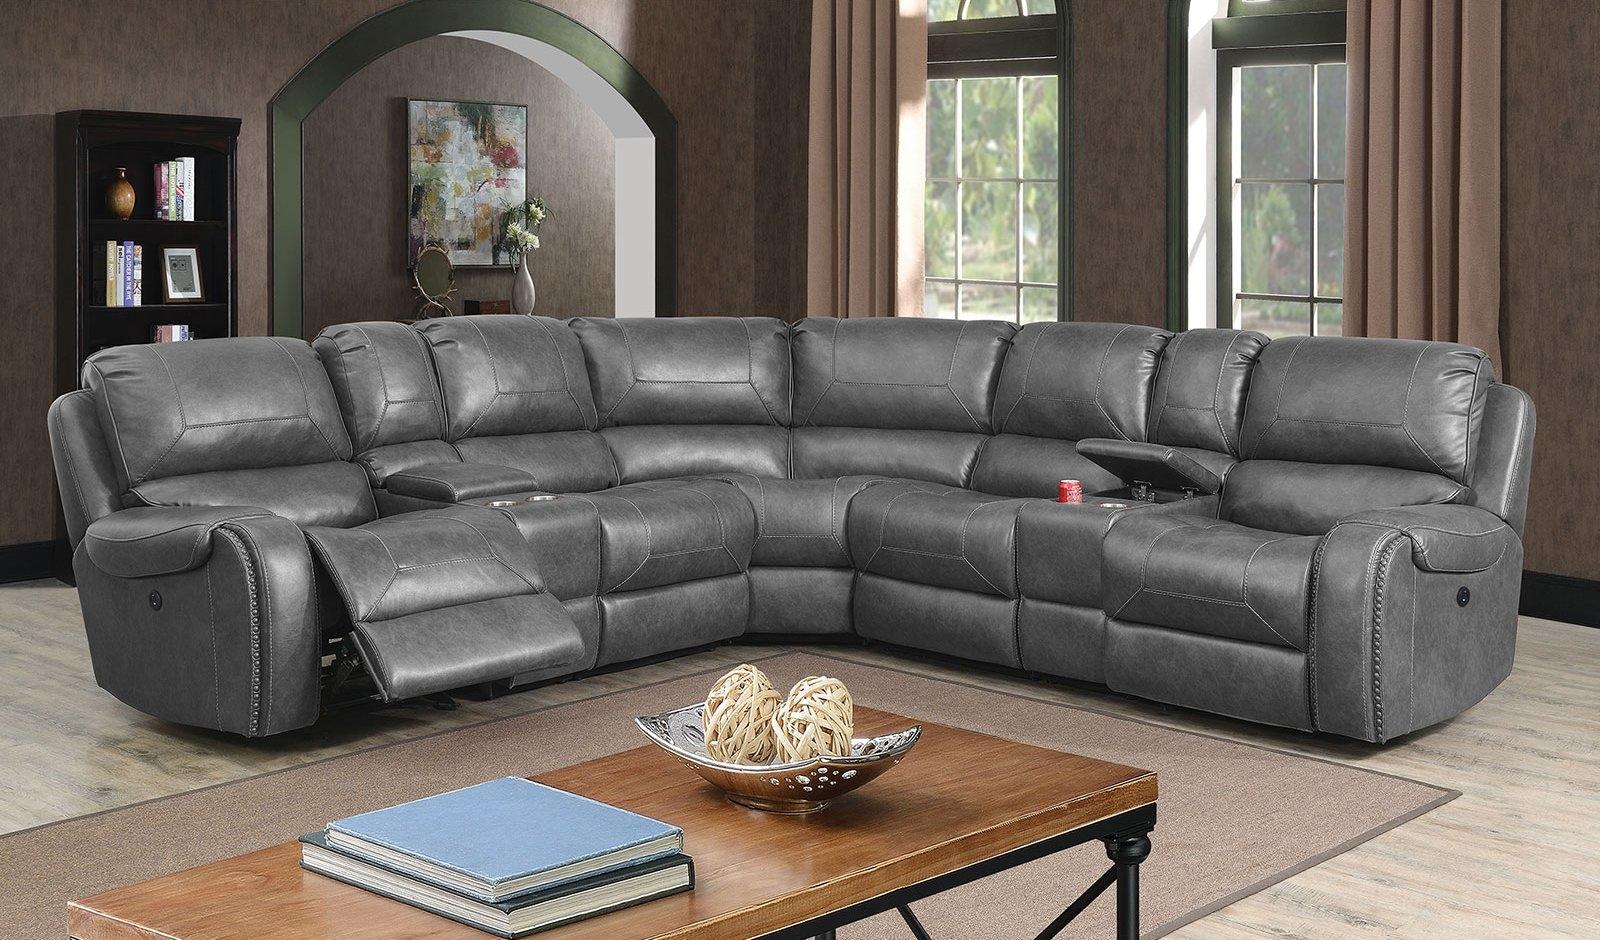 Furniture of America CM6951GY-SECT Joanne Recliner Sectional